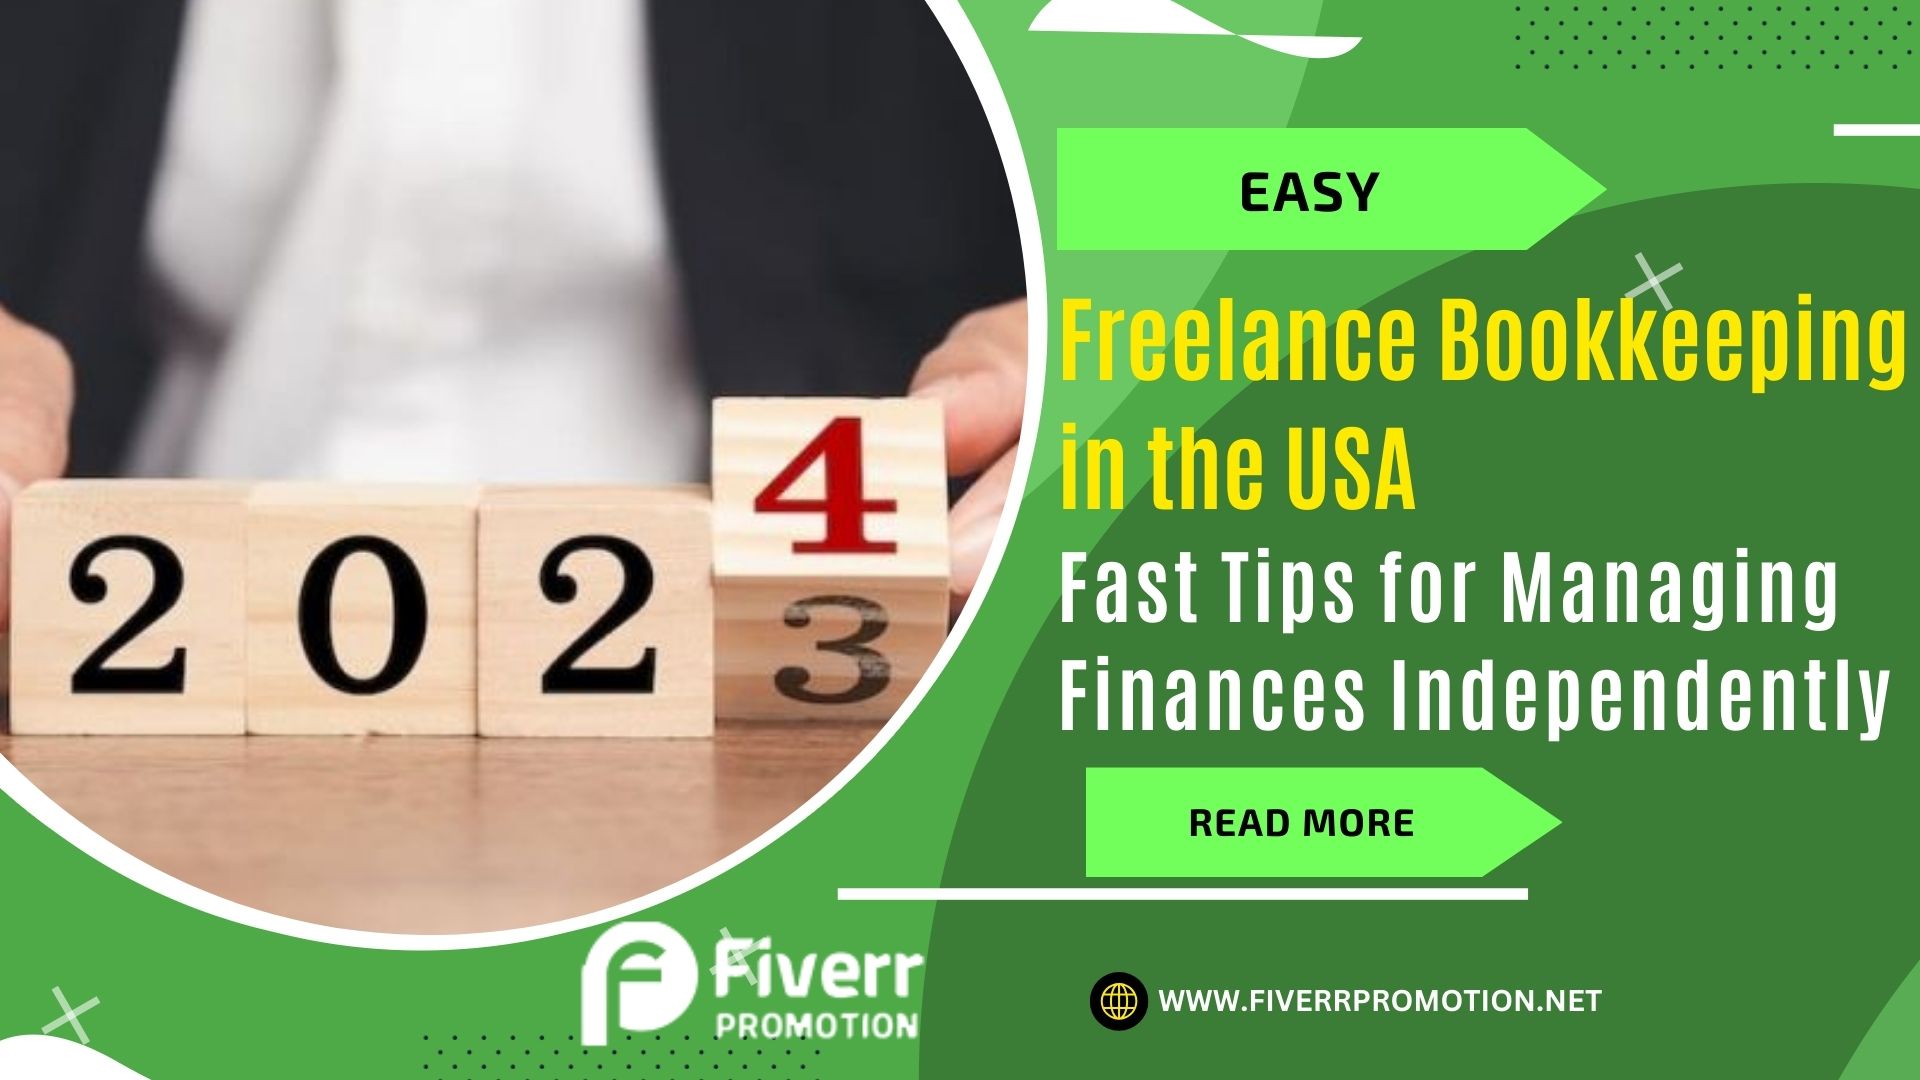 Easy Freelance Bookkeeping in the USA: Fast Tips for Managing Finances Independently